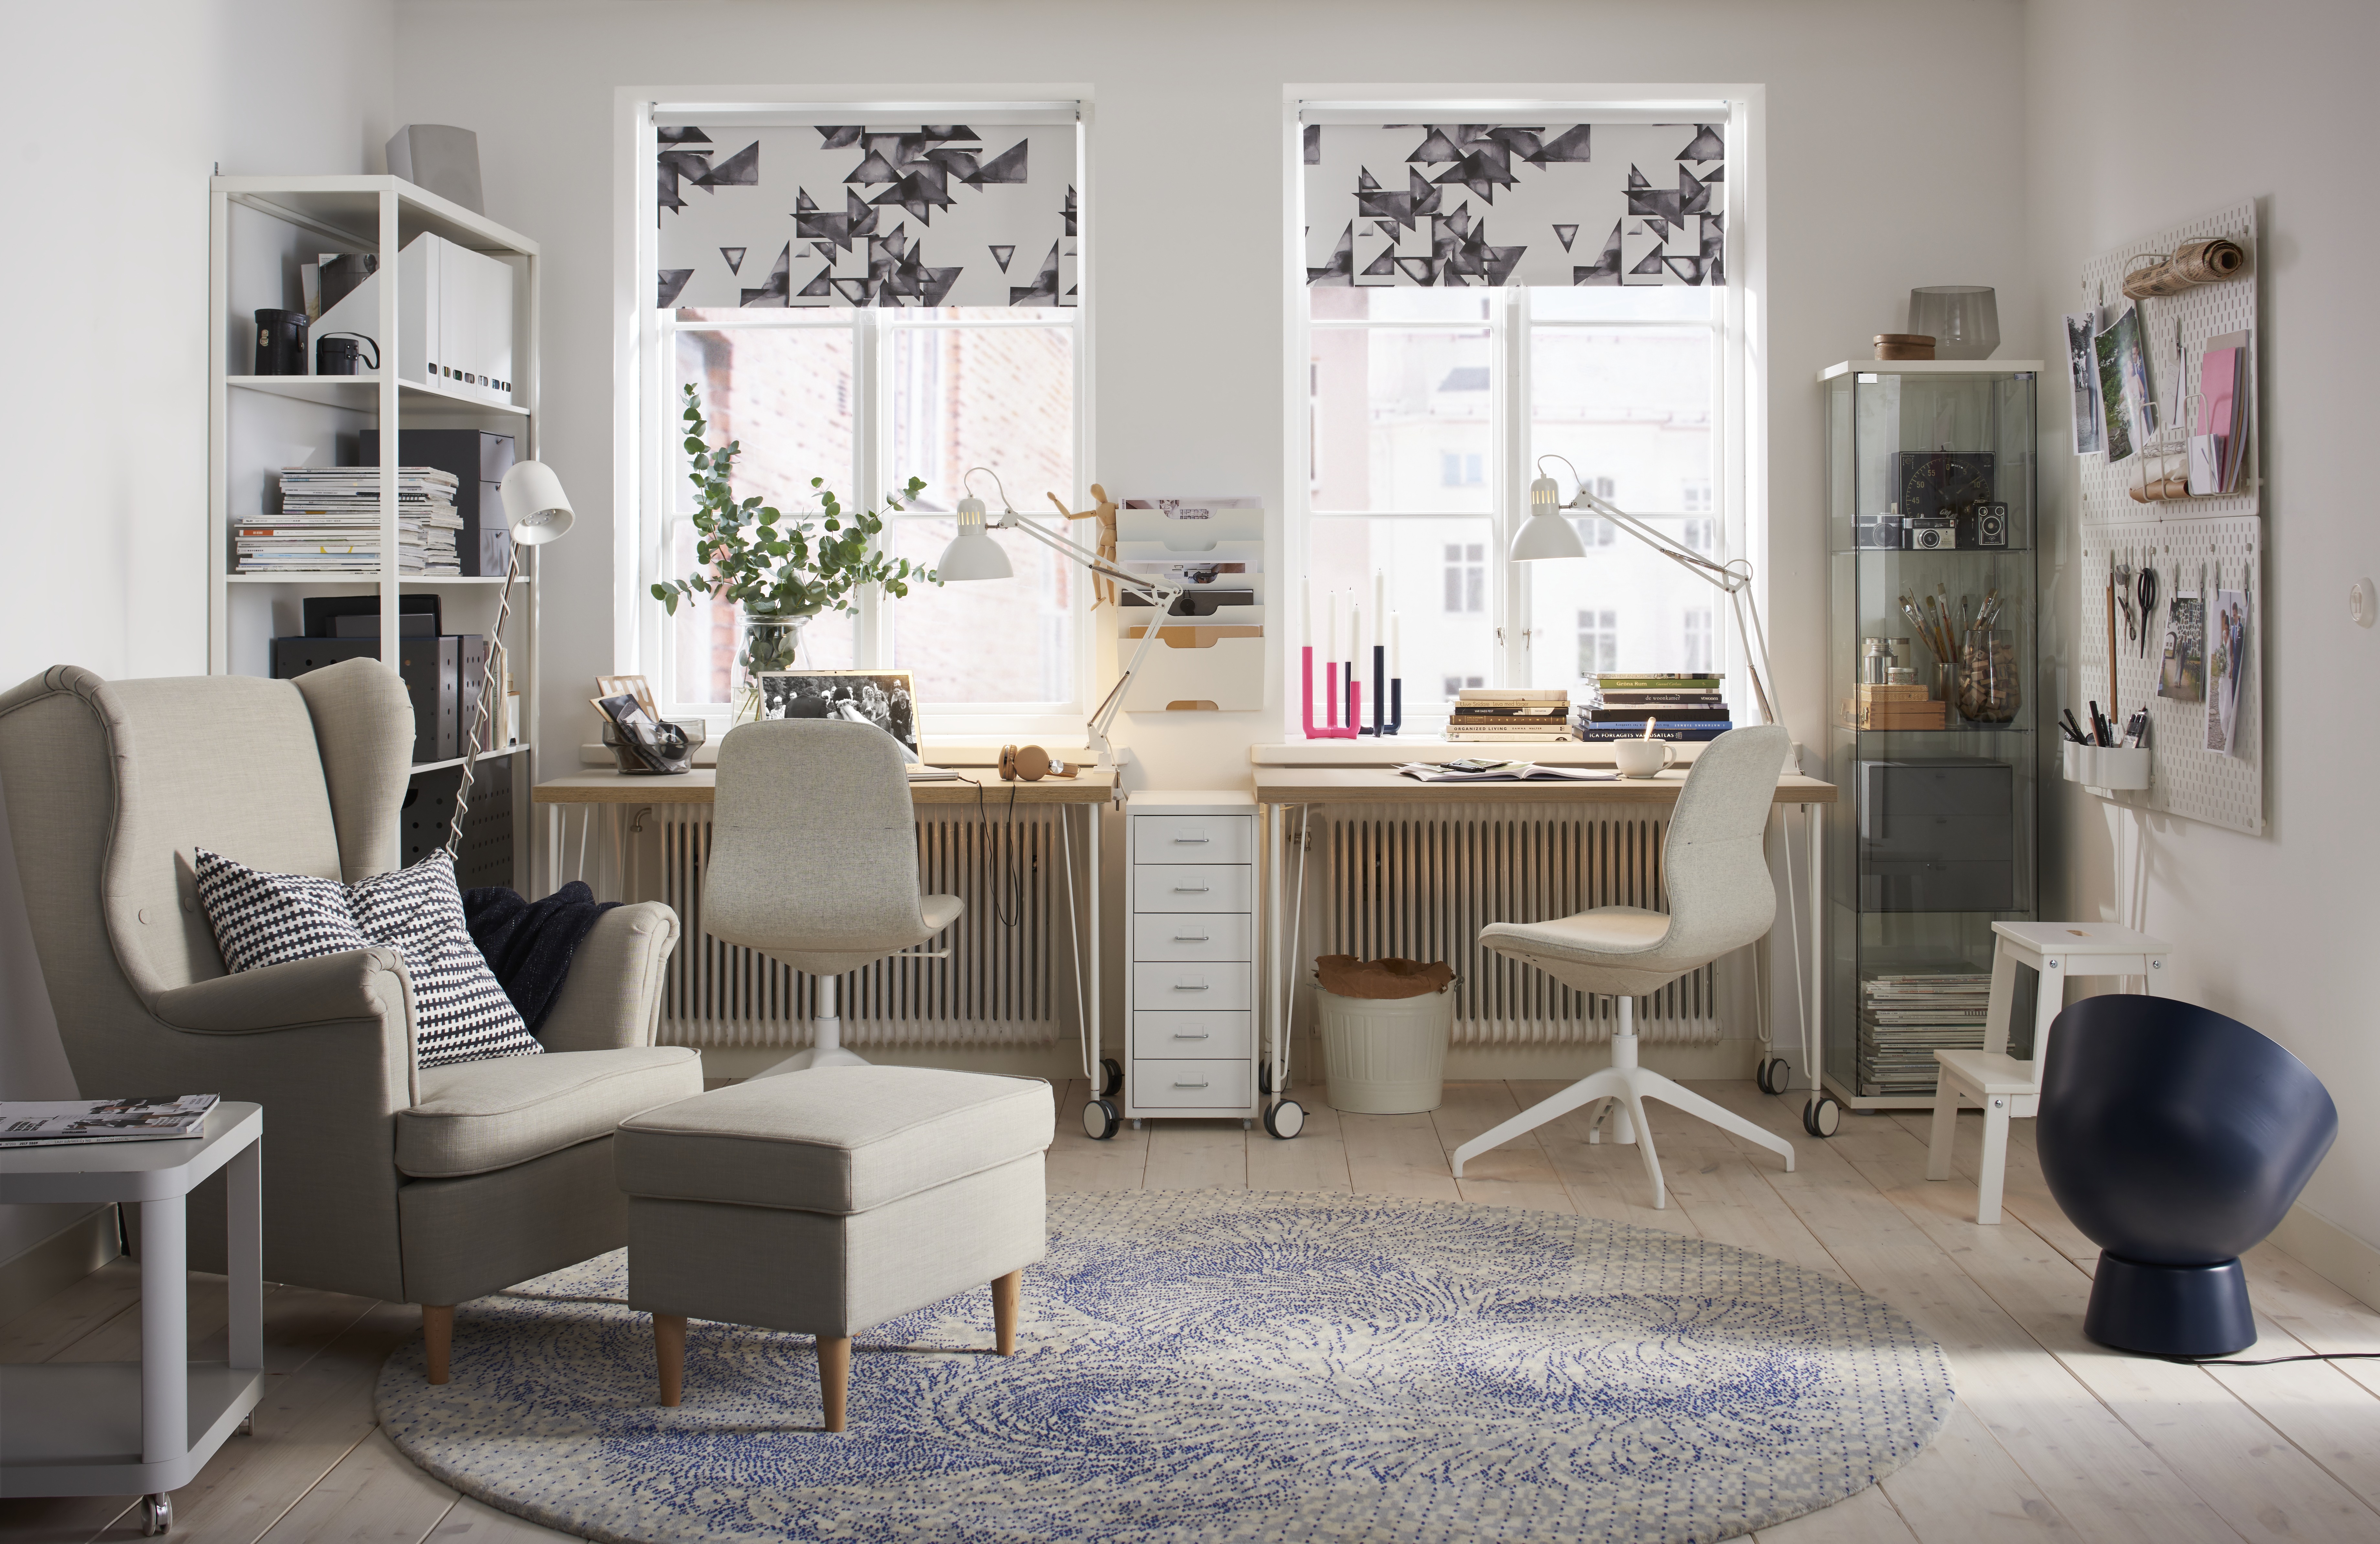 Home Office Design How To Design Your Own Space To Work From Home